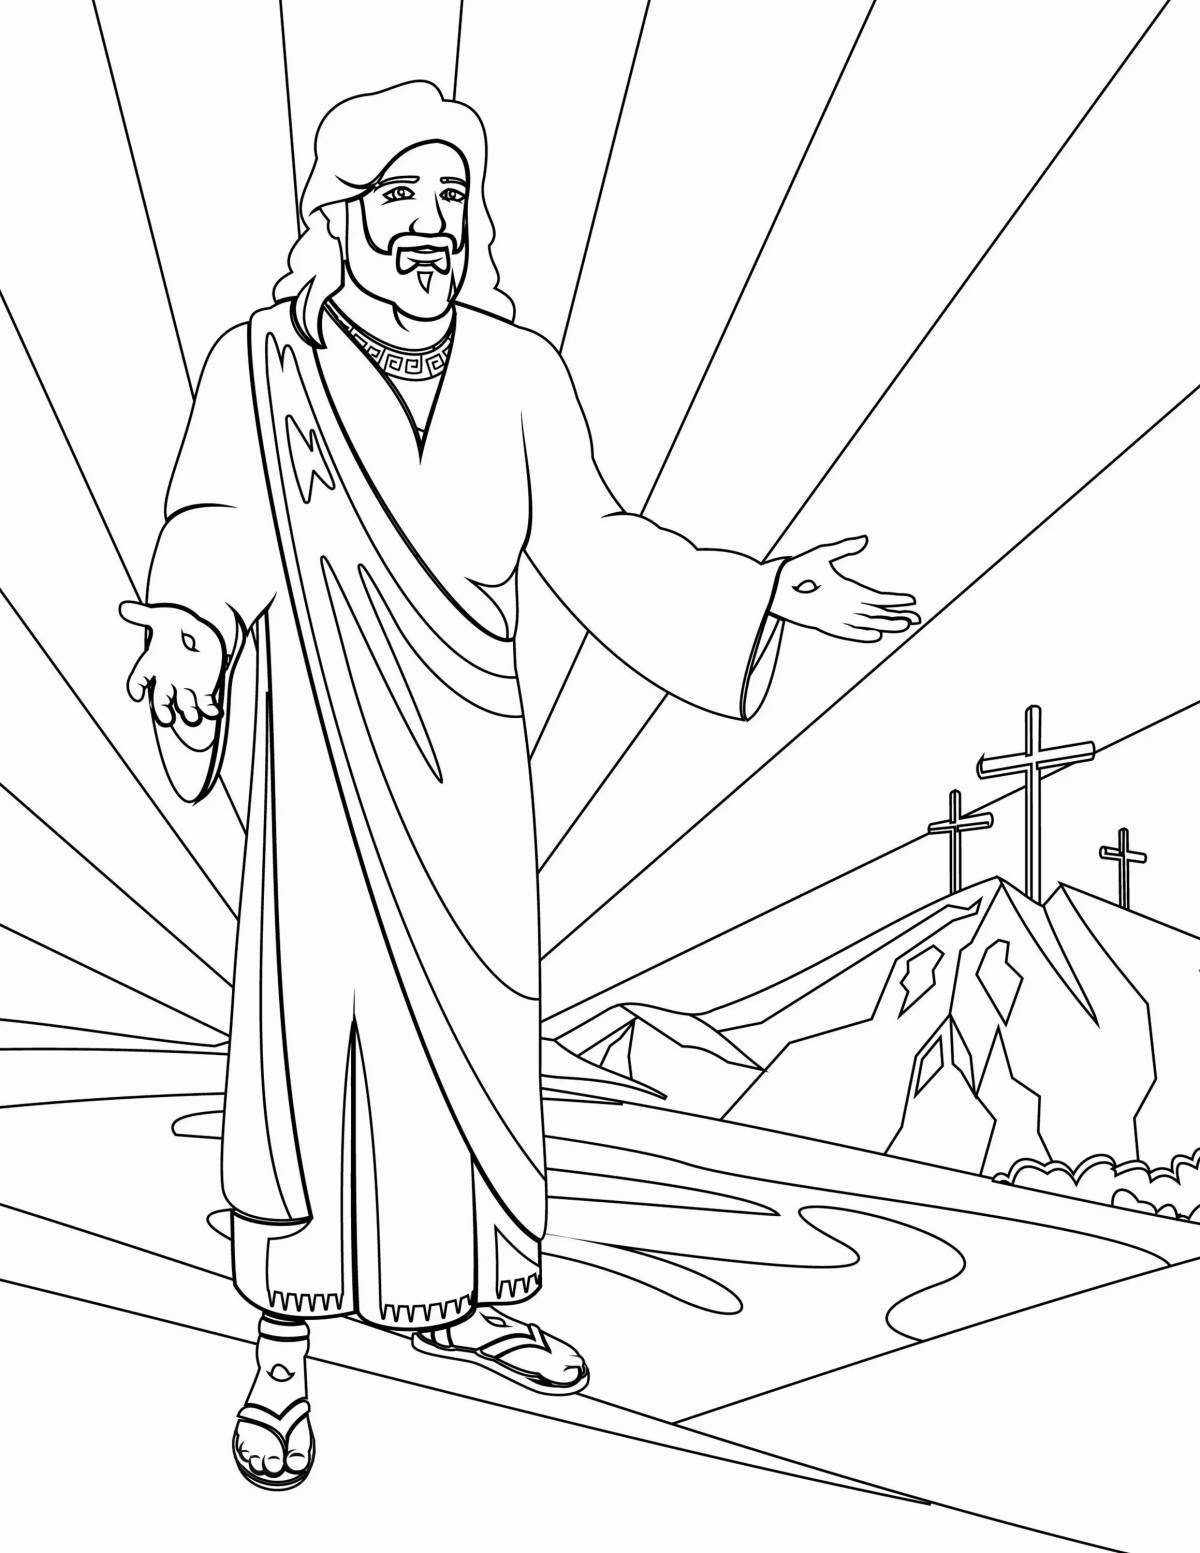 Joseph charming coloring page